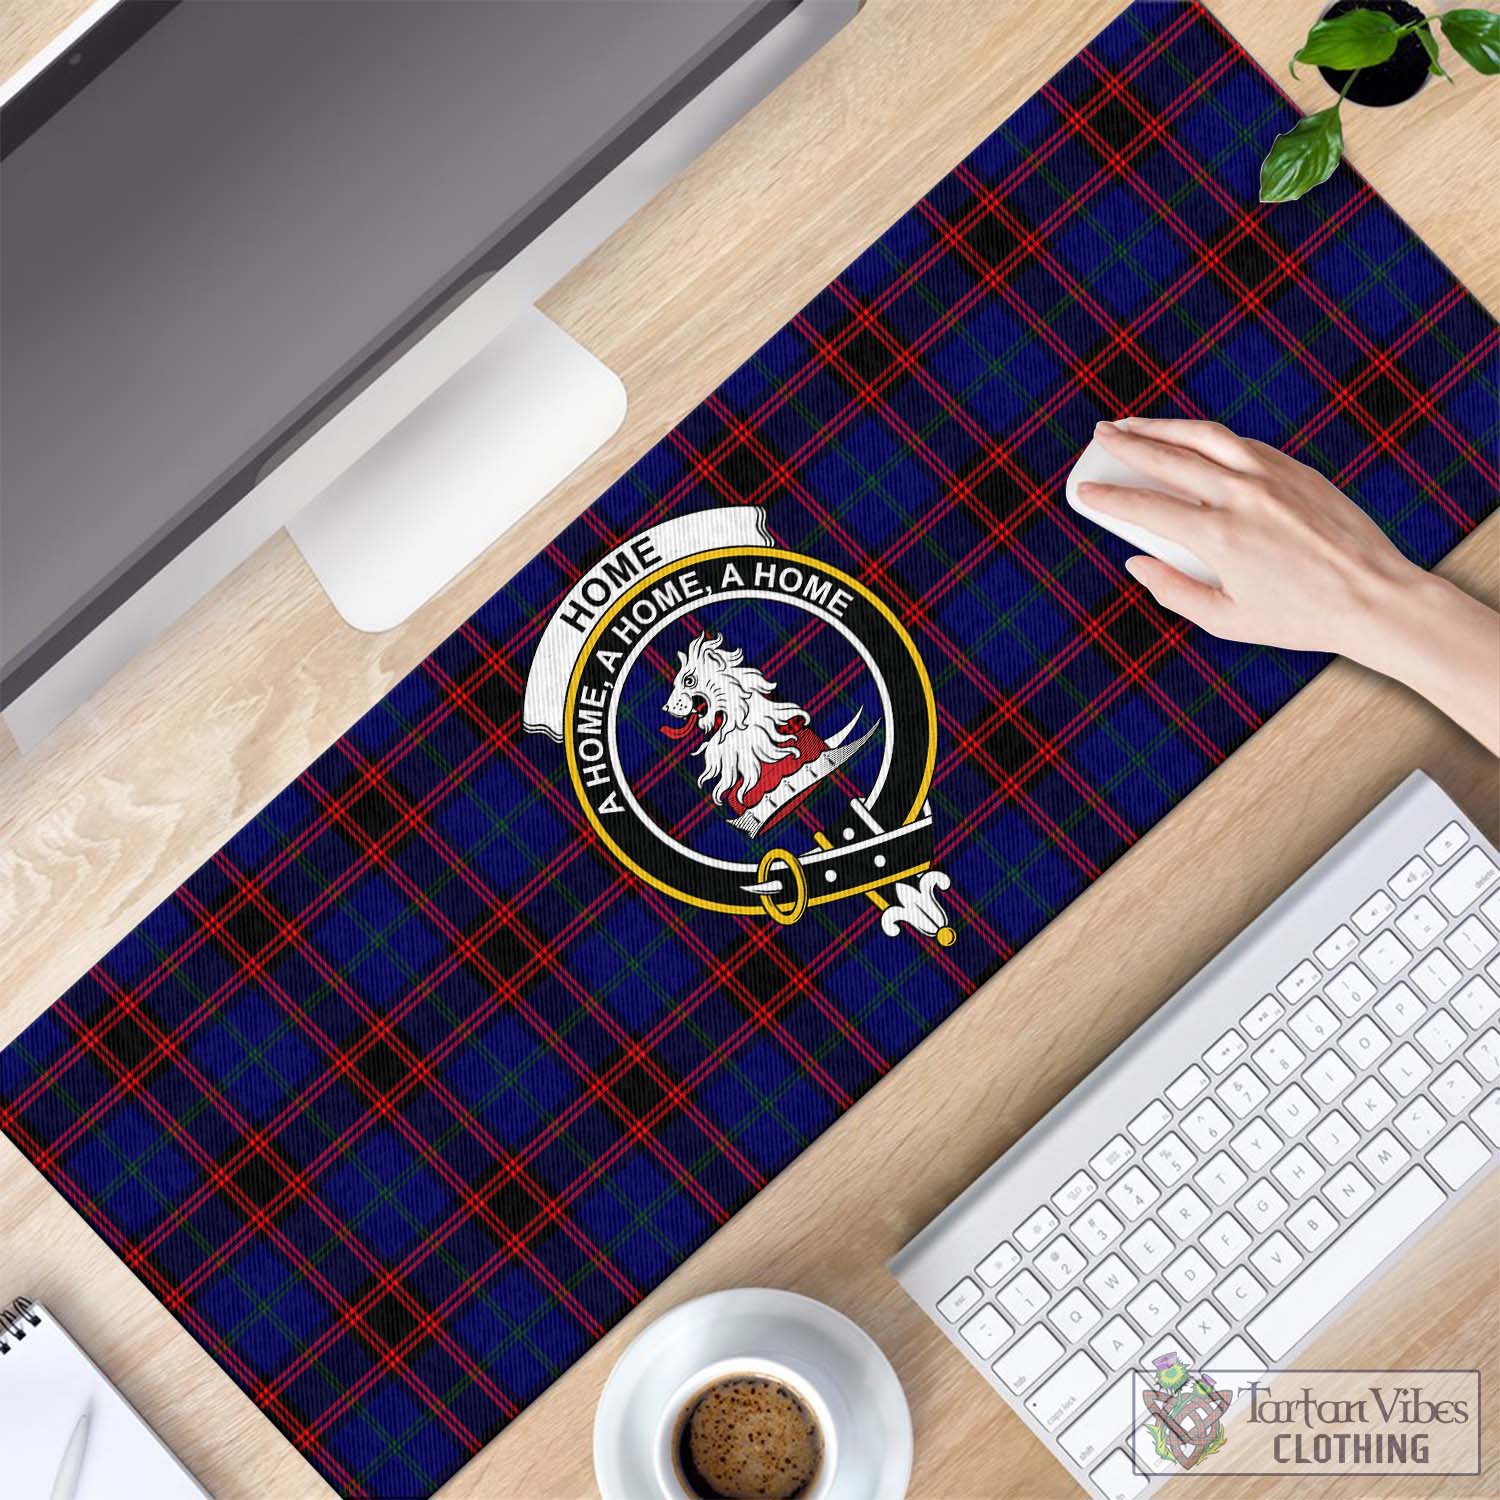 Tartan Vibes Clothing Home Modern Tartan Mouse Pad with Family Crest